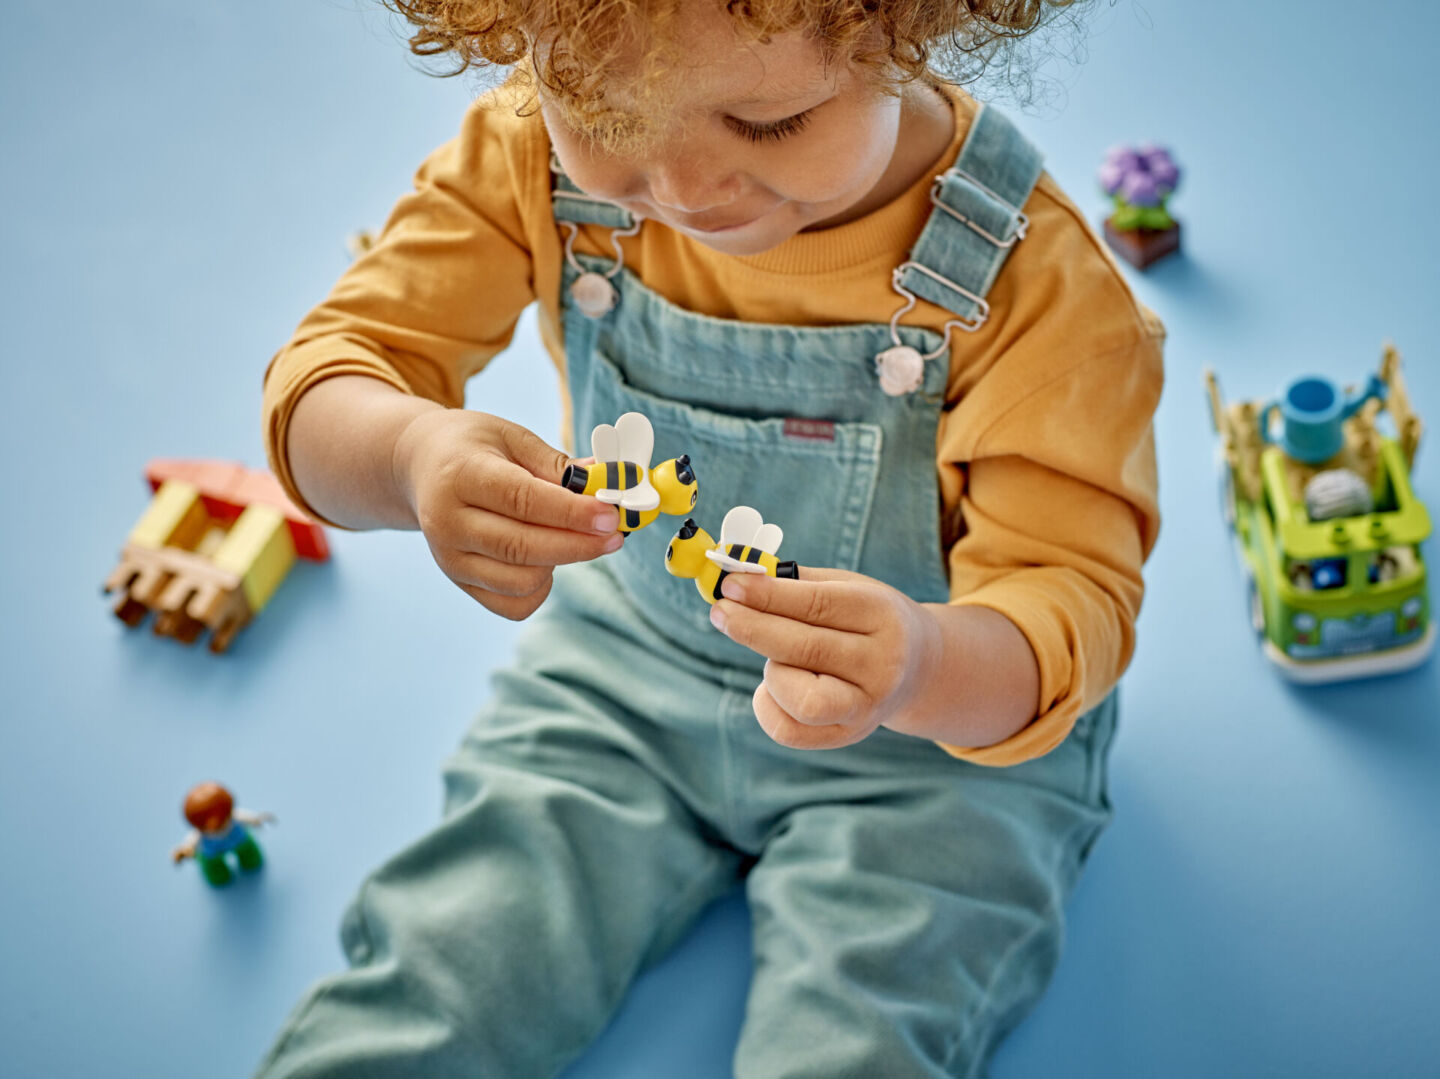 toddler playing with LEGO DUPLO figurines on blue backdrop